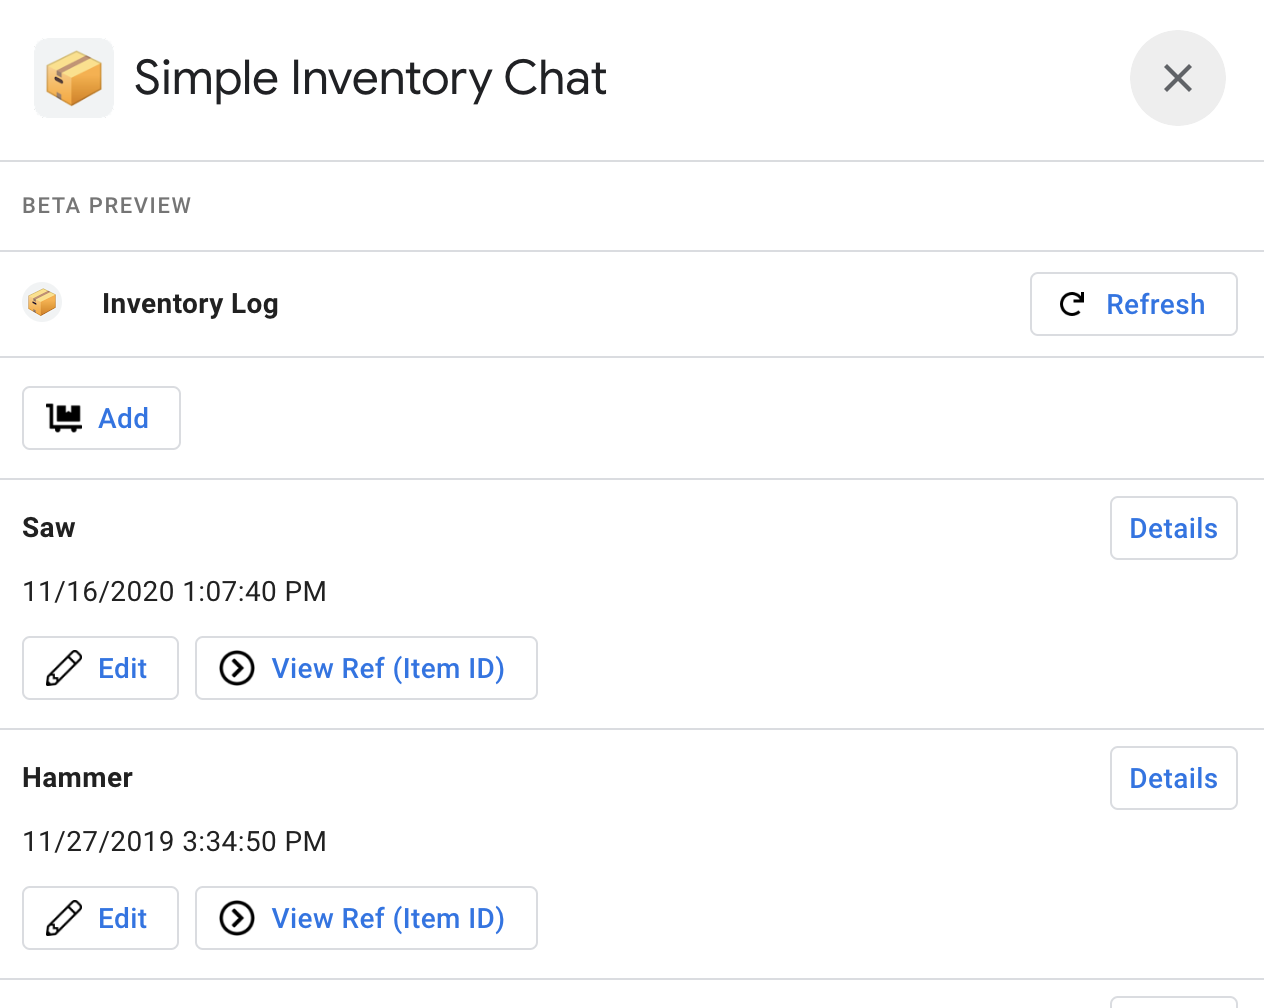 Simple Inventory Chat app.